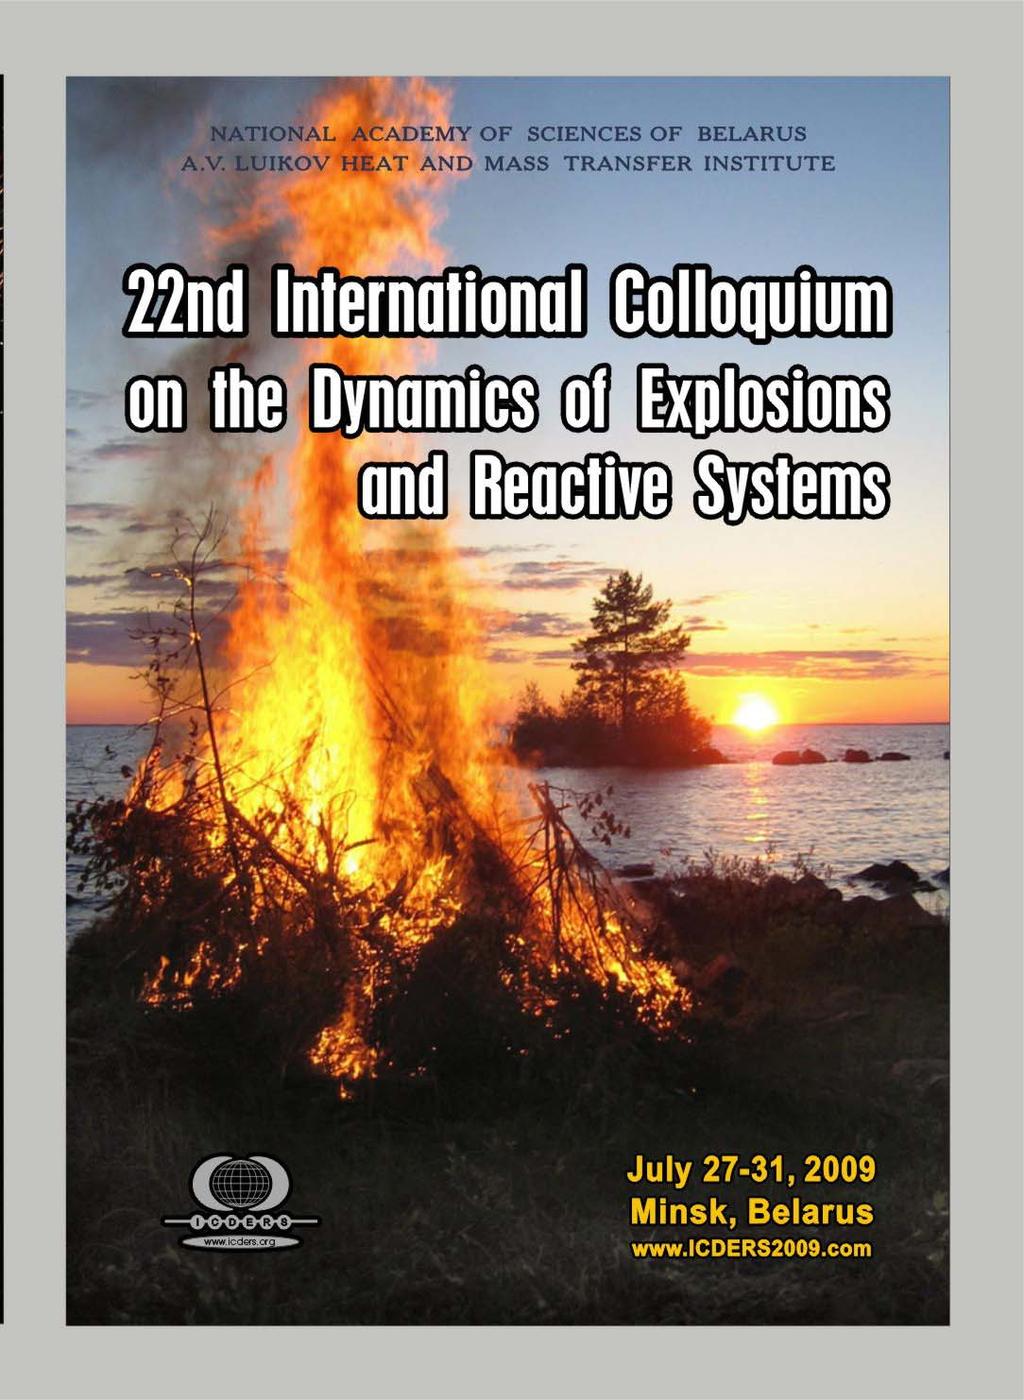 22 nd International Colloquium on the Dynamics of Explosions and Reactive Systems July 27-31, 2009 Luikov Heat and Mass Transfer Institute Minsk, Belarus First announcement The International